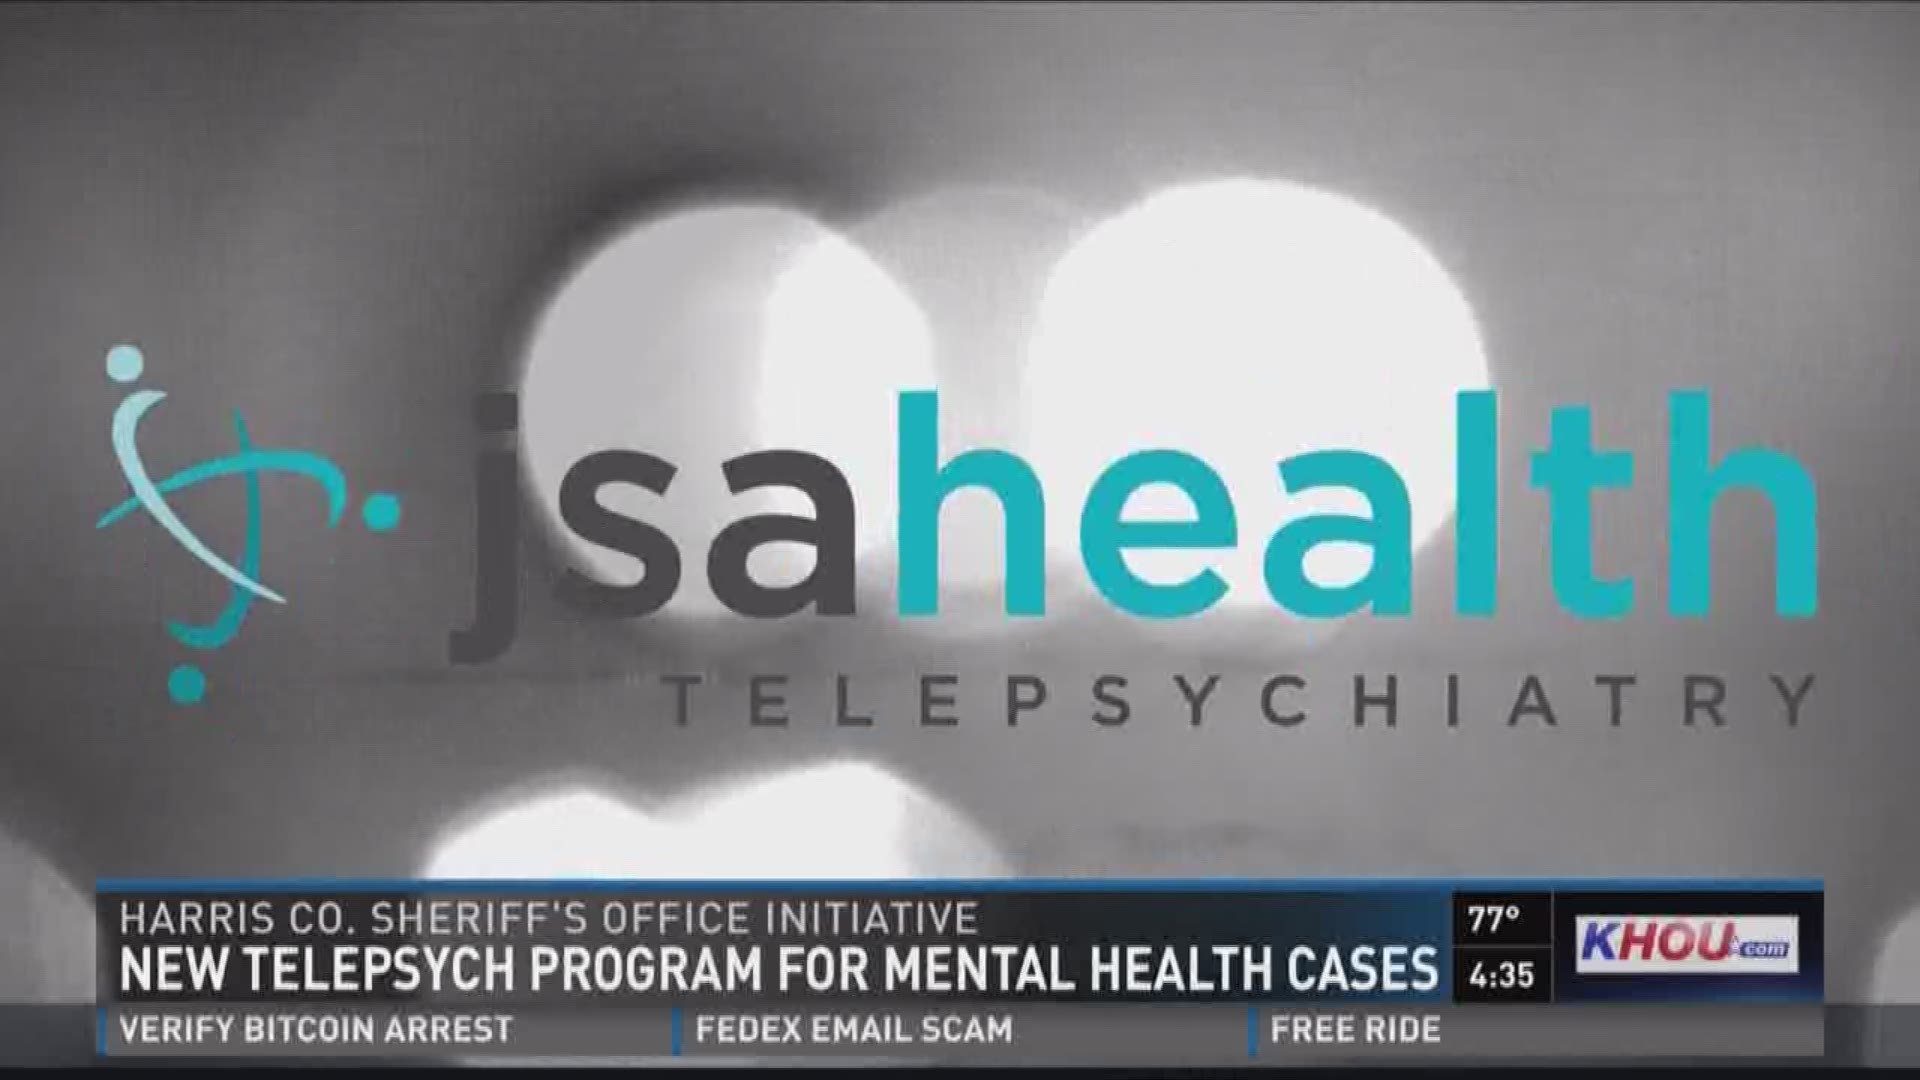 Psychiatrists will be on call 24/7 to video chat with people deputies encounter on calls. 